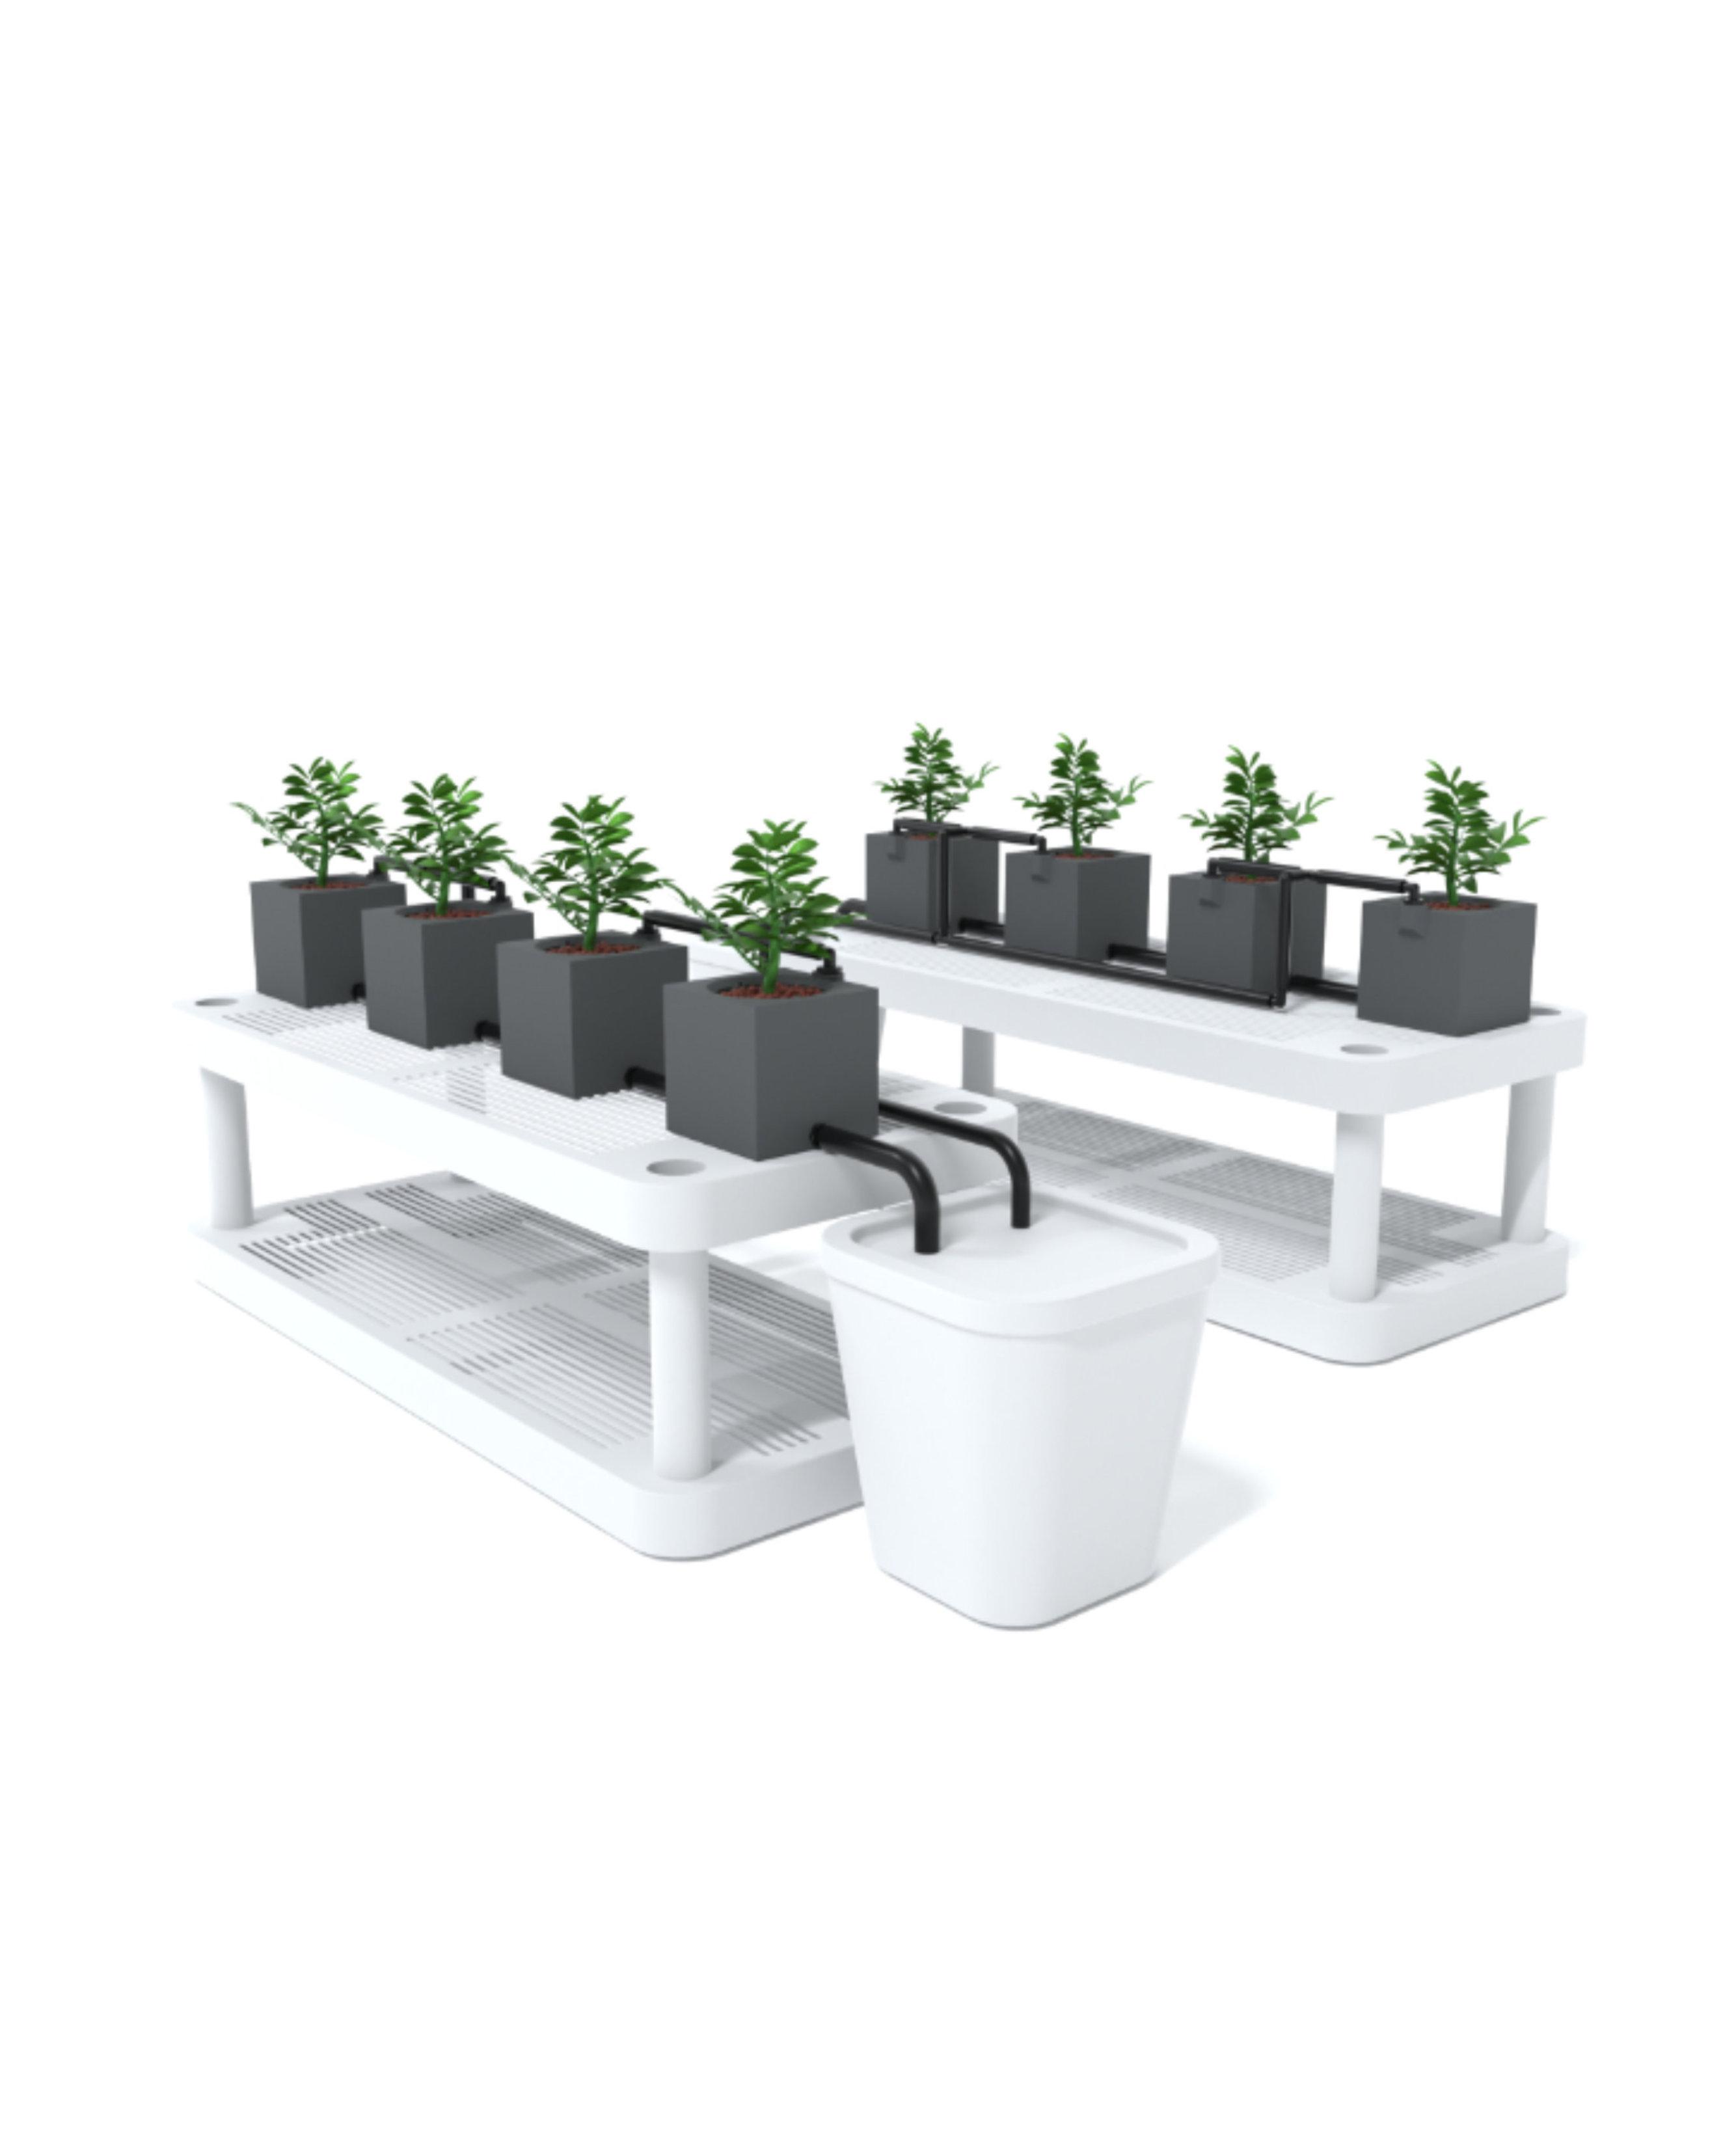 Hydroponic System 3d model